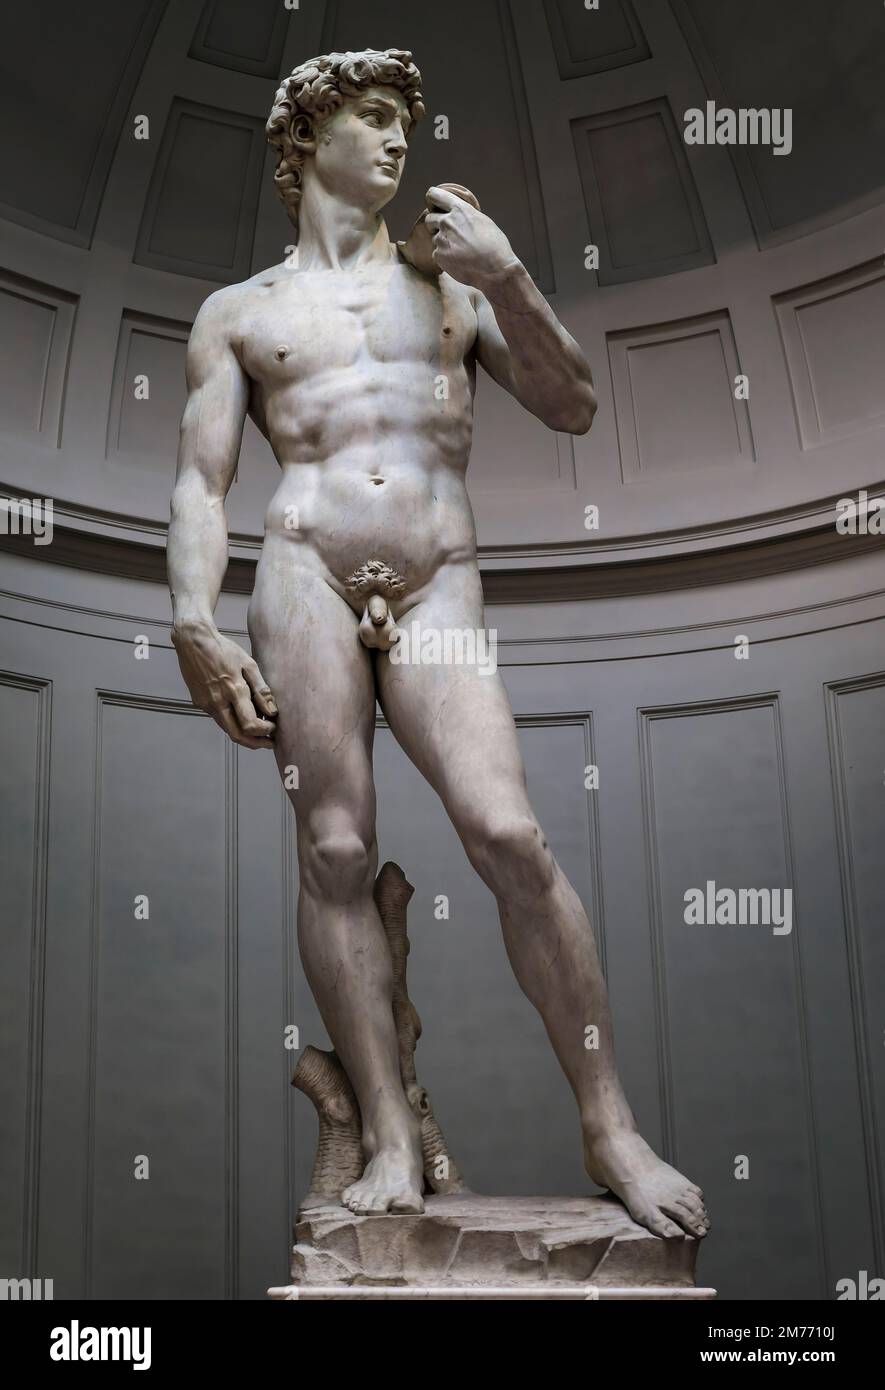 Florence, Italy - June 03, 2022: The original David marble statue, Michelangelo famous masterpiece, at the Accademia Gallery Stock Photo